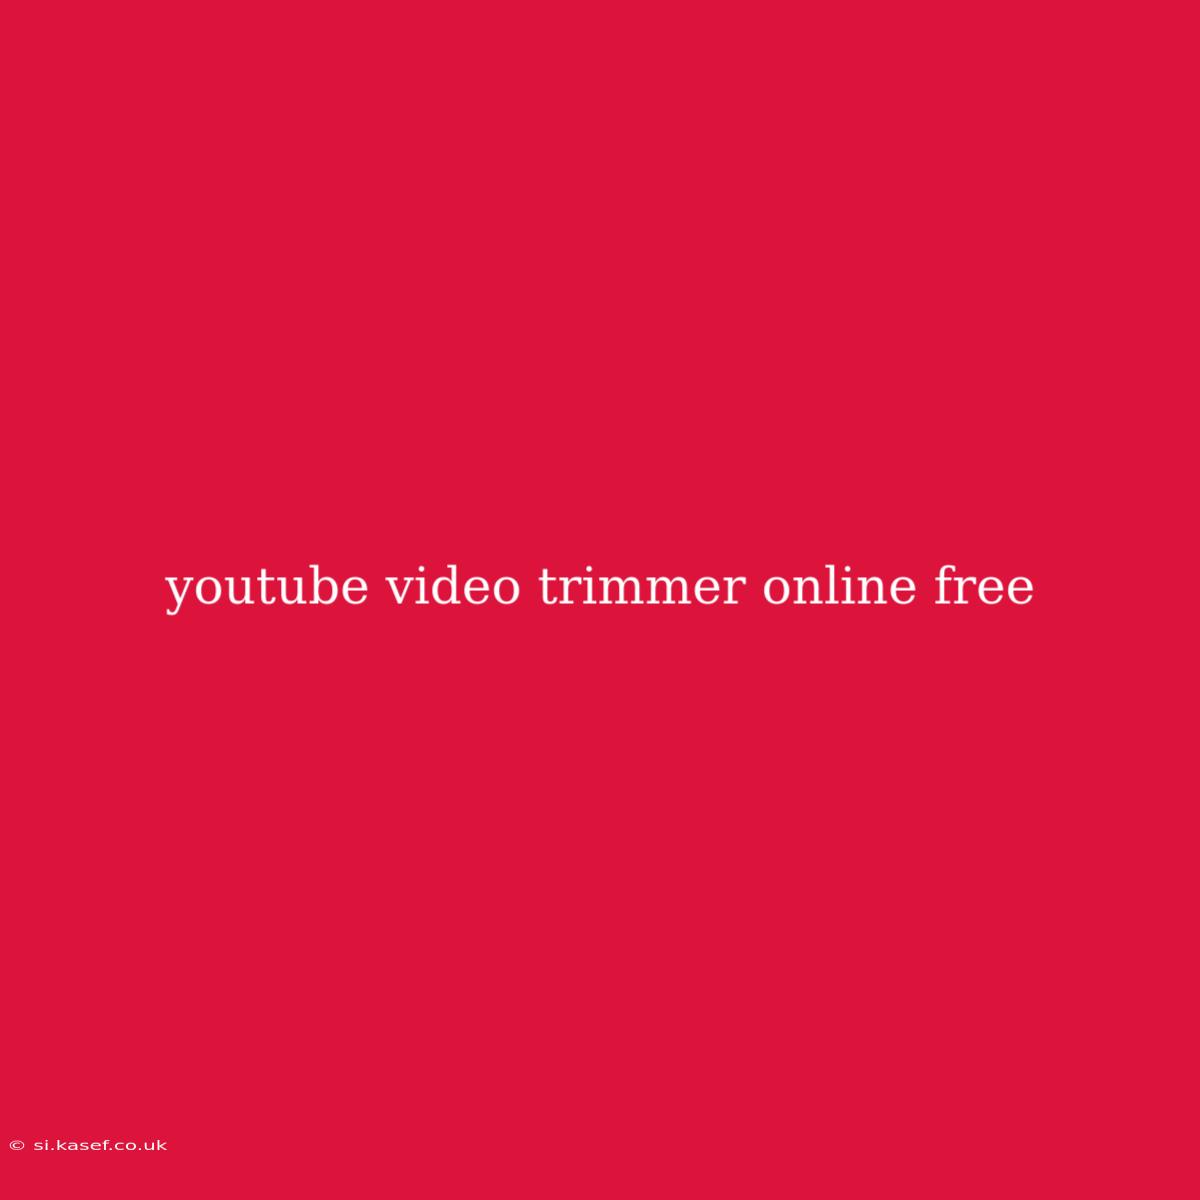 Youtube Video Trimmer Online Free